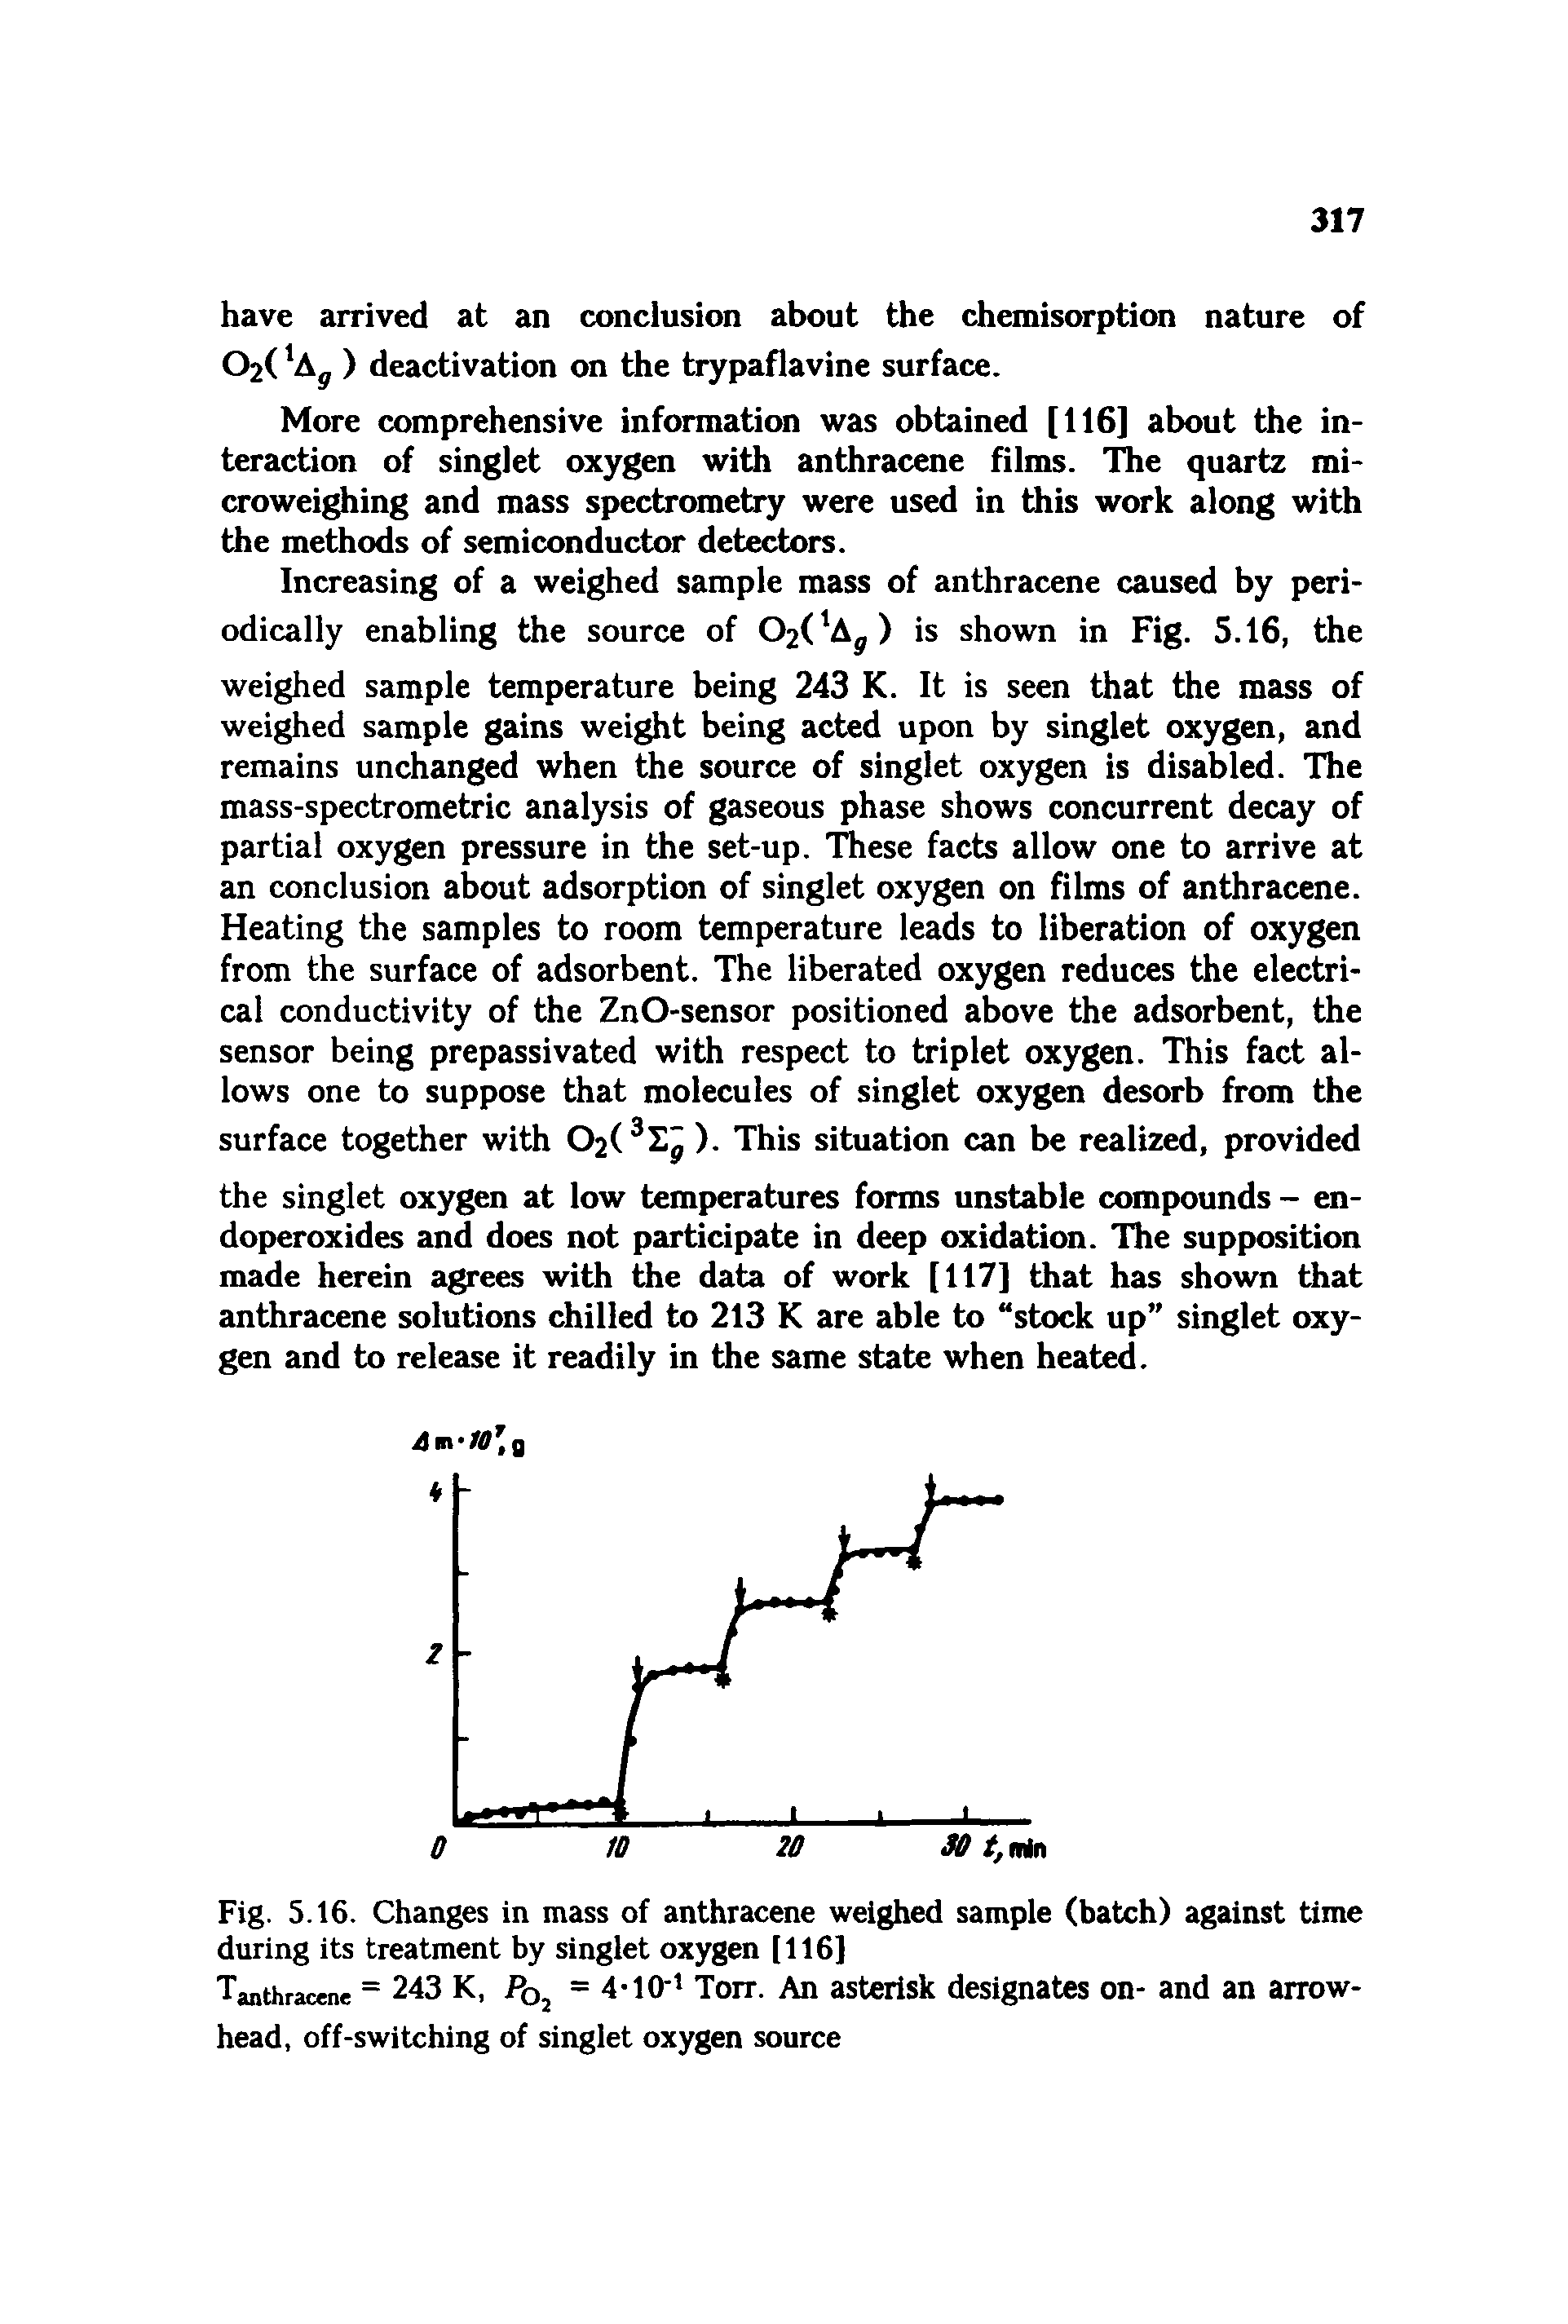 Fig. 5.16. Changes in mass of anthracene weighed sample (batch) against time during its treatment by singlet oxygen [116]...